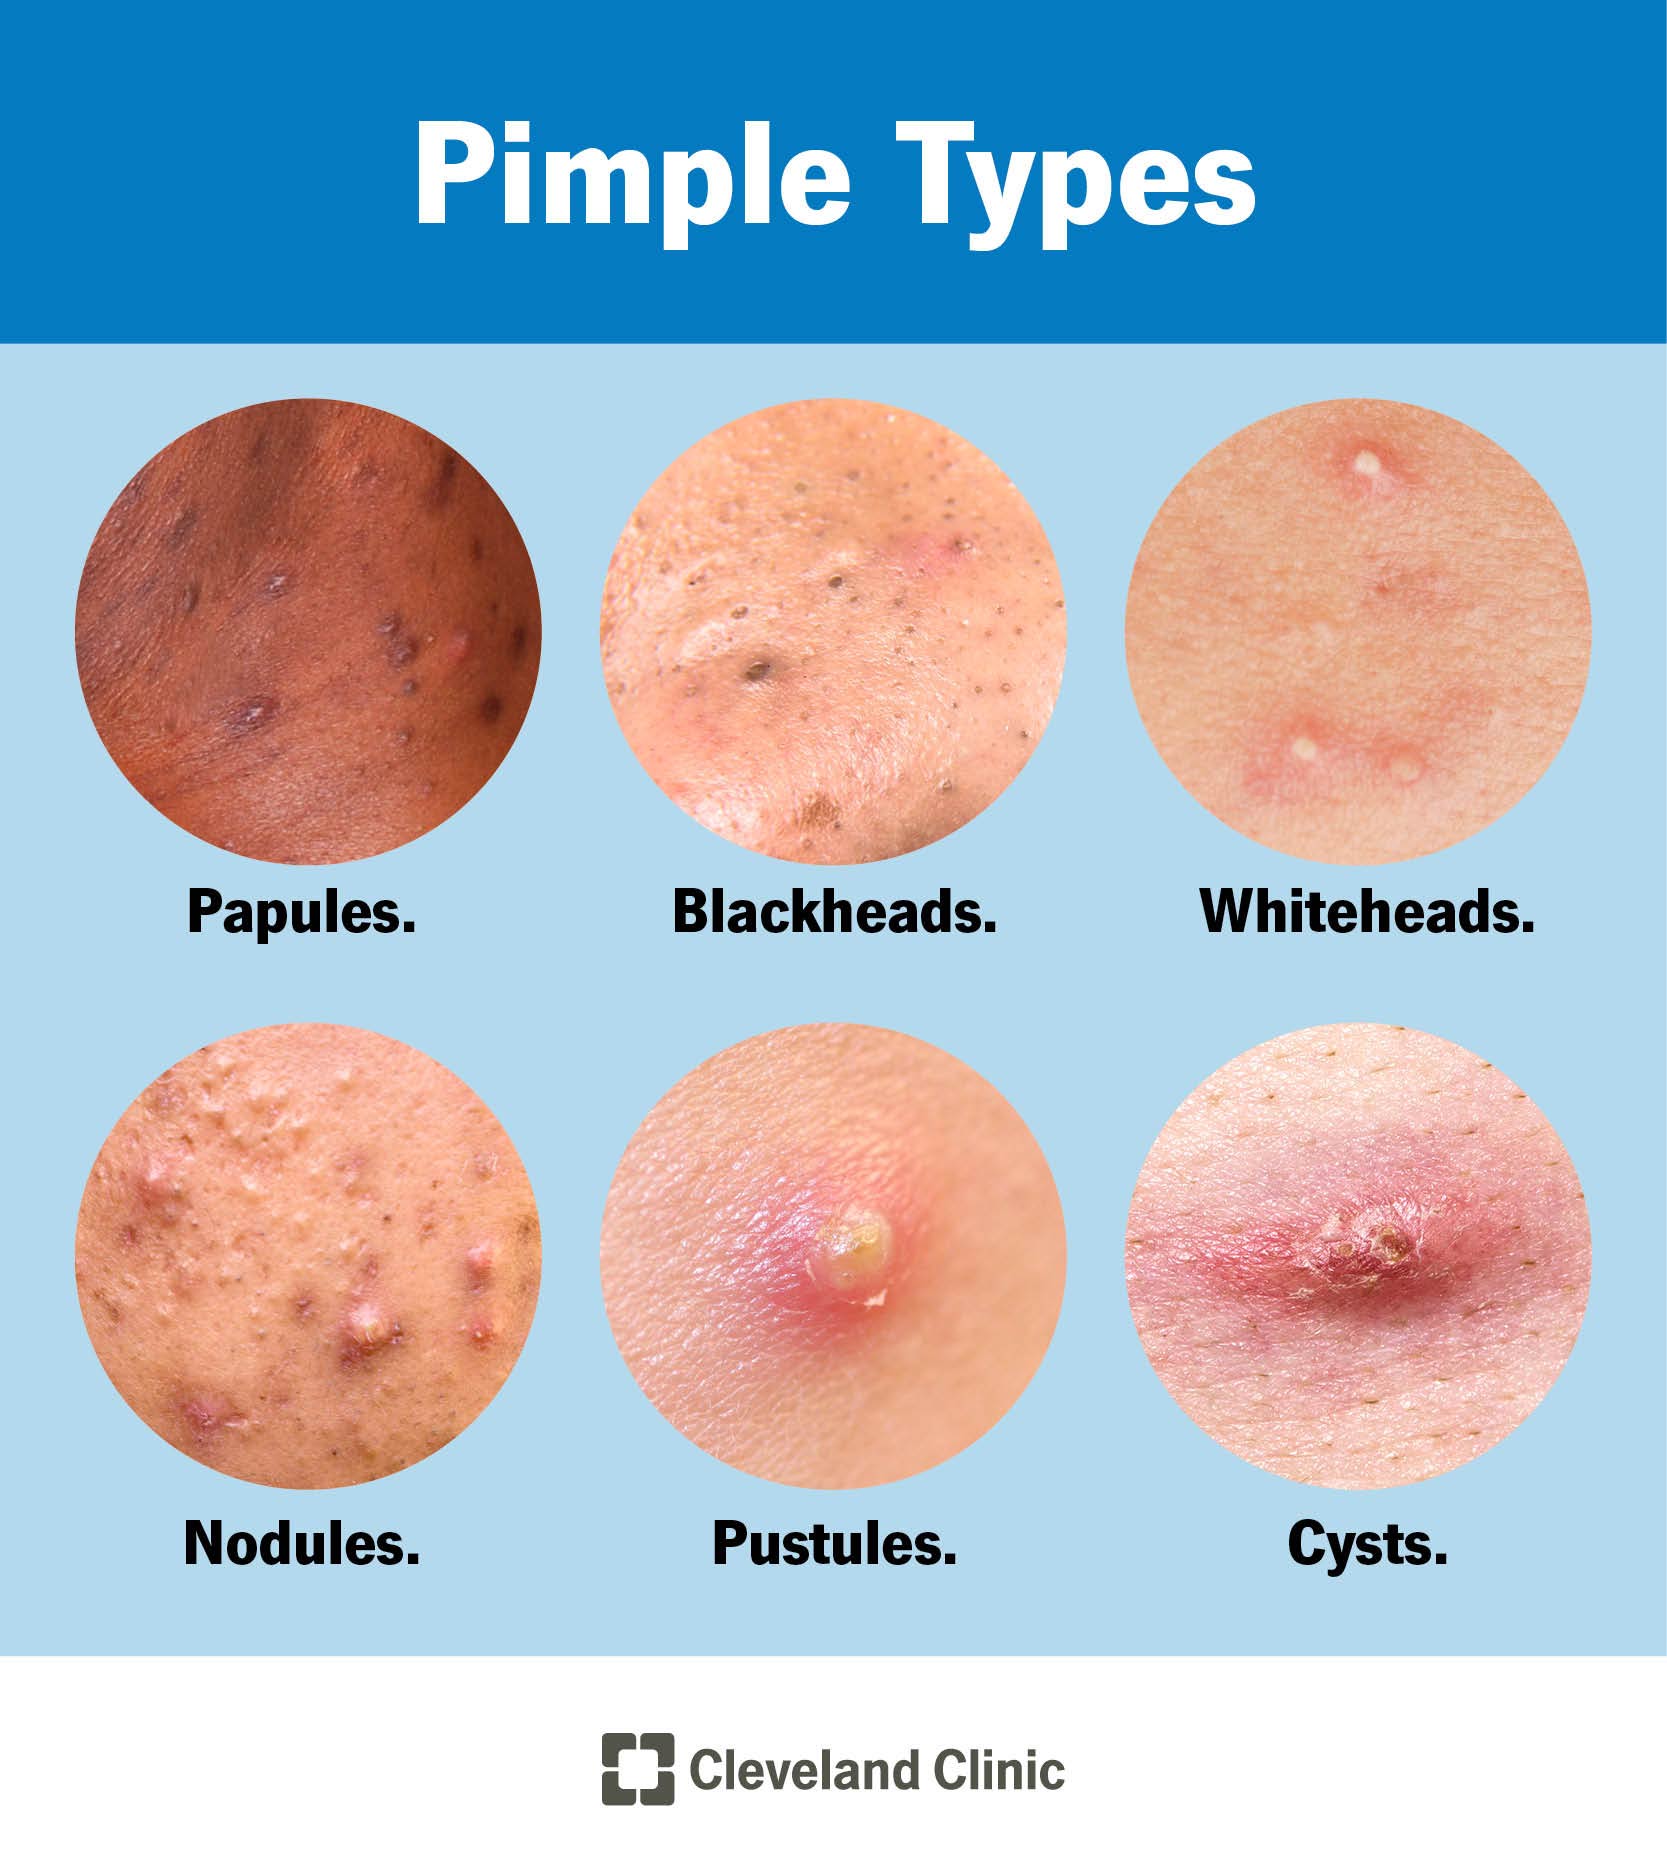 Six different types of pimples, including papules, blackheads, whiteheads, nodules, pustules and cysts.